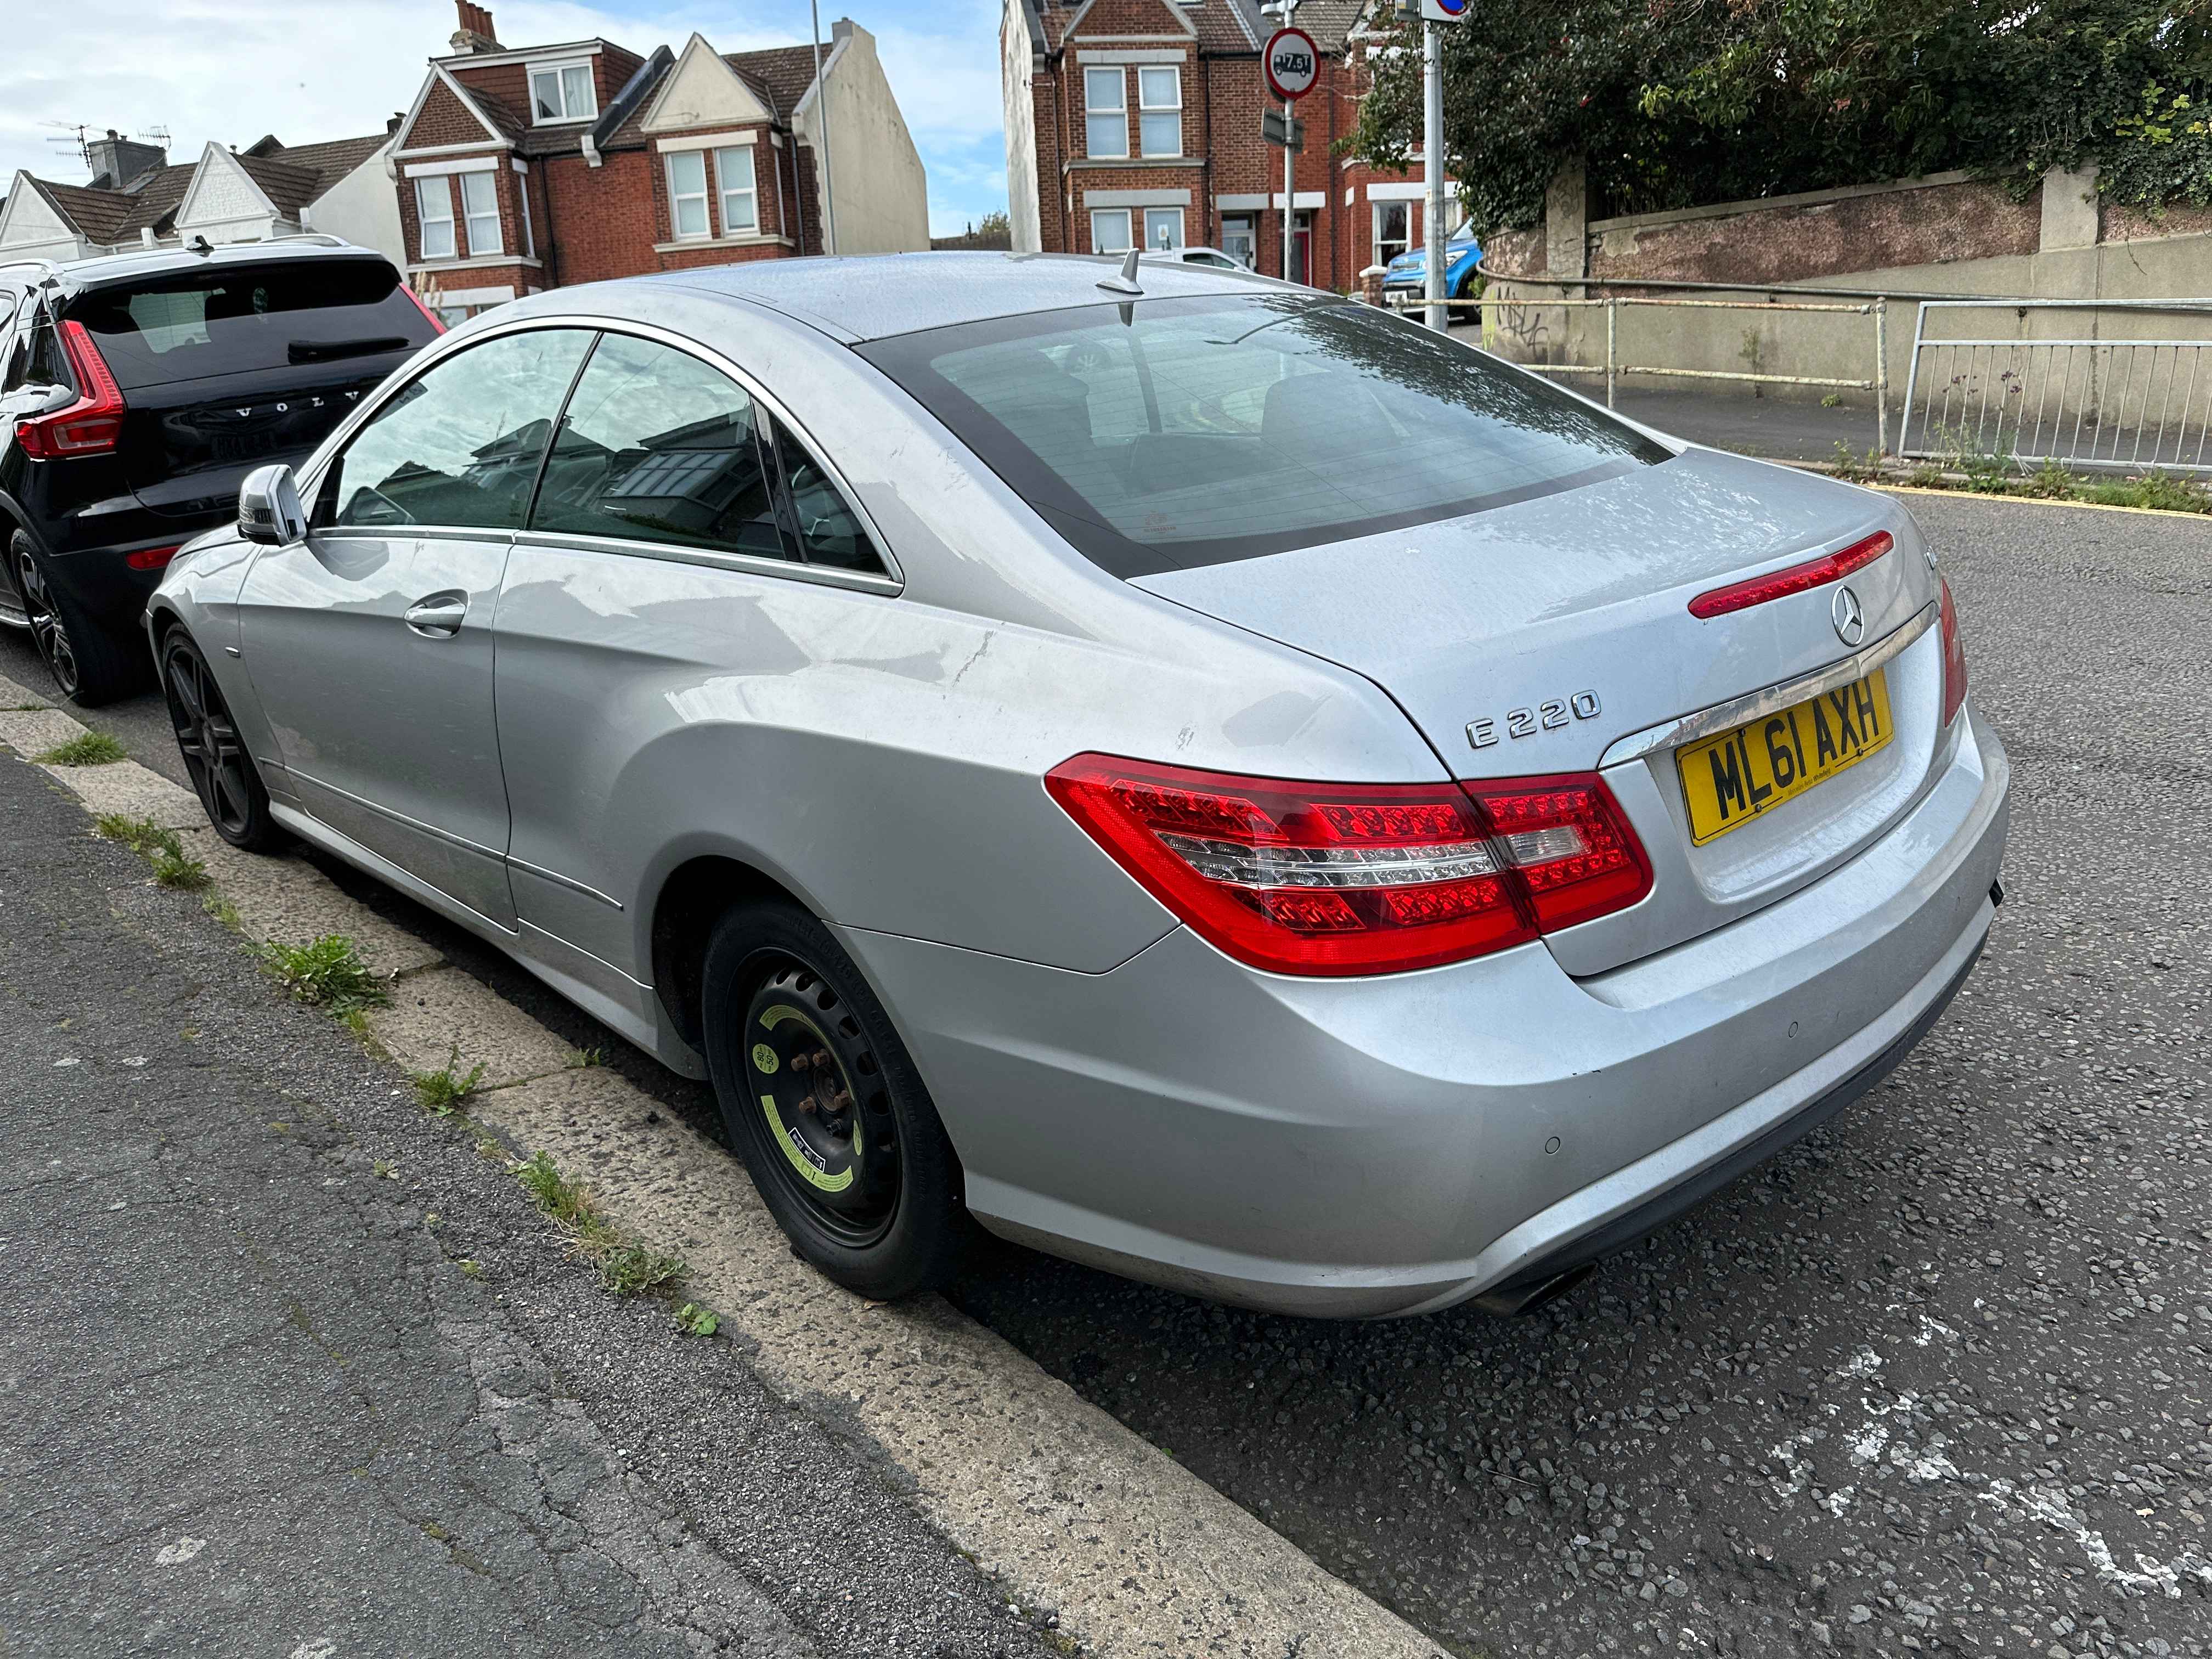 Photograph of ML61 AXH - a SIlver Mercedes E Class parked in Hollingdean by a non-resident, and potentially abandoned. The second of five photographs supplied by the residents of Hollingdean.